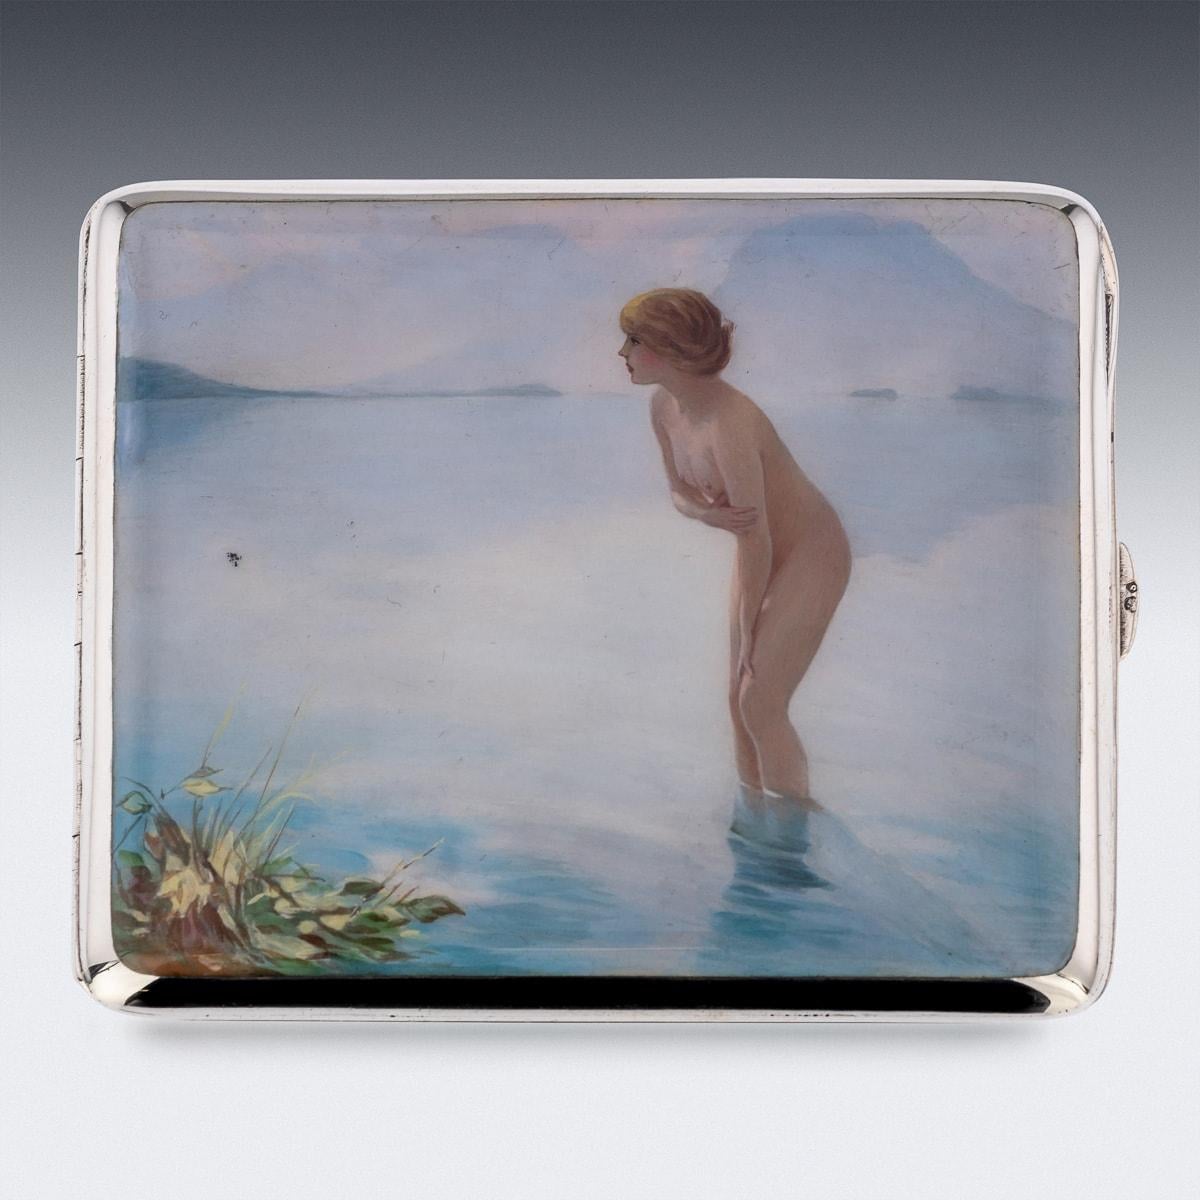 20th Century German Erotic Solid Silver & Enamel Cigarette Case, c.1910 In Good Condition For Sale In Royal Tunbridge Wells, Kent